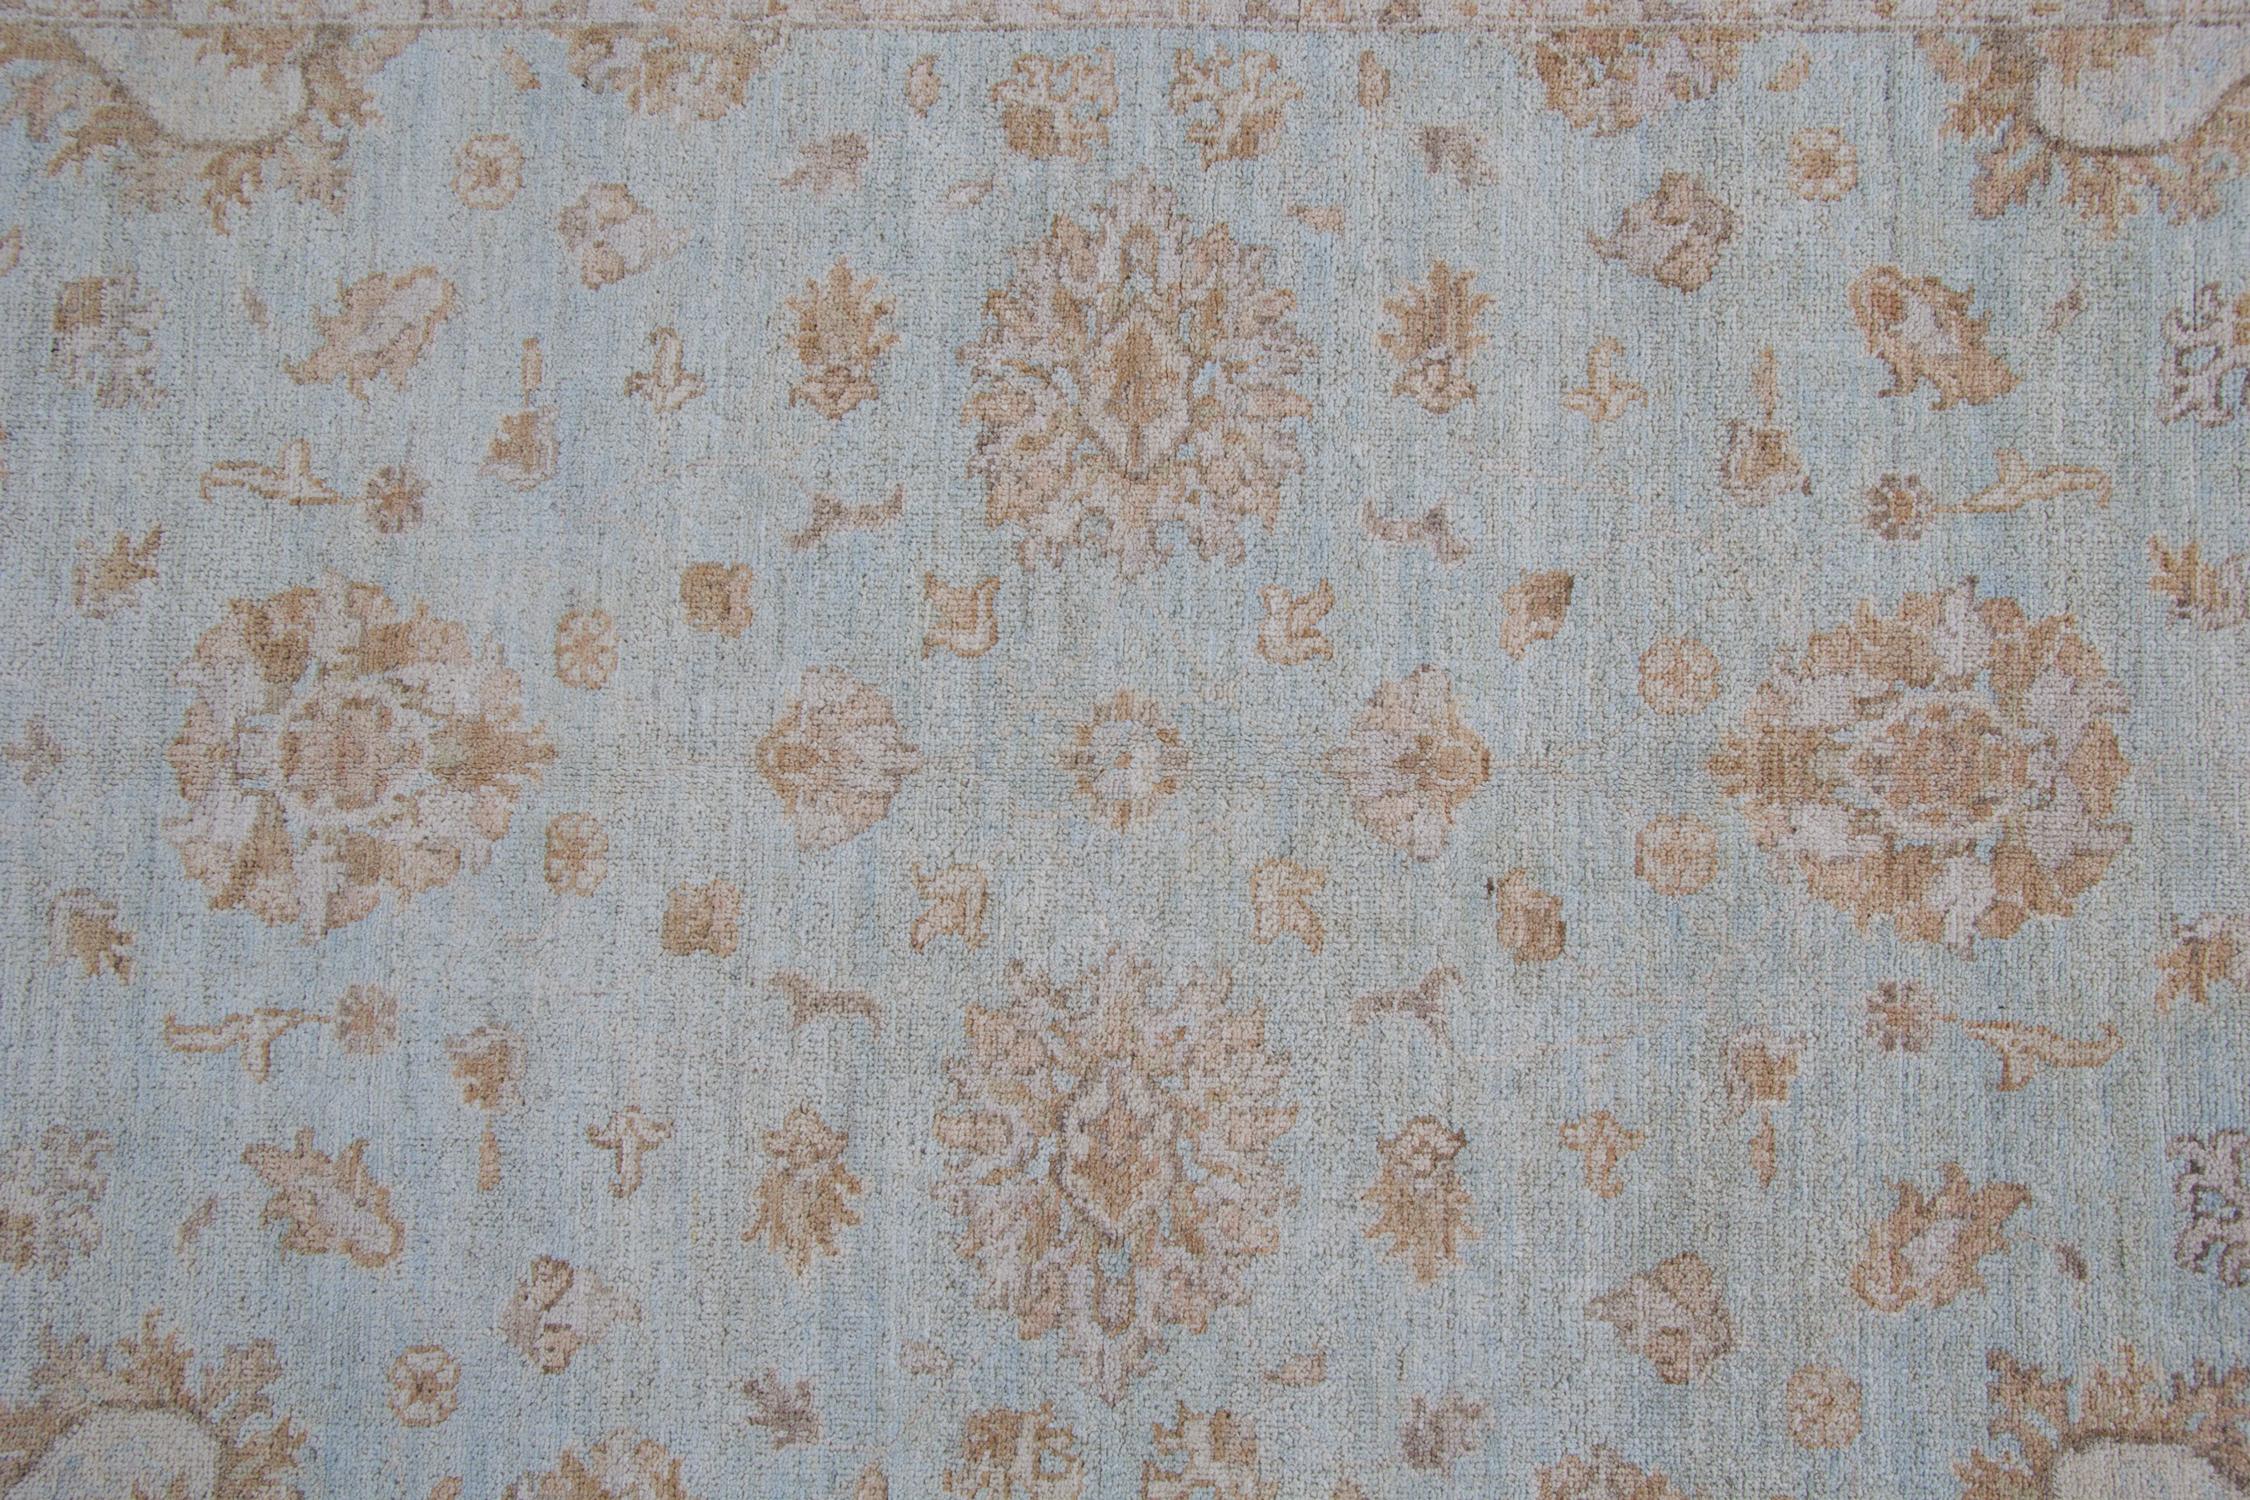 Handwoven Blue Rug Carpet Traditional Floral Area Rug All Over Design In New Condition For Sale In Hampshire, GB